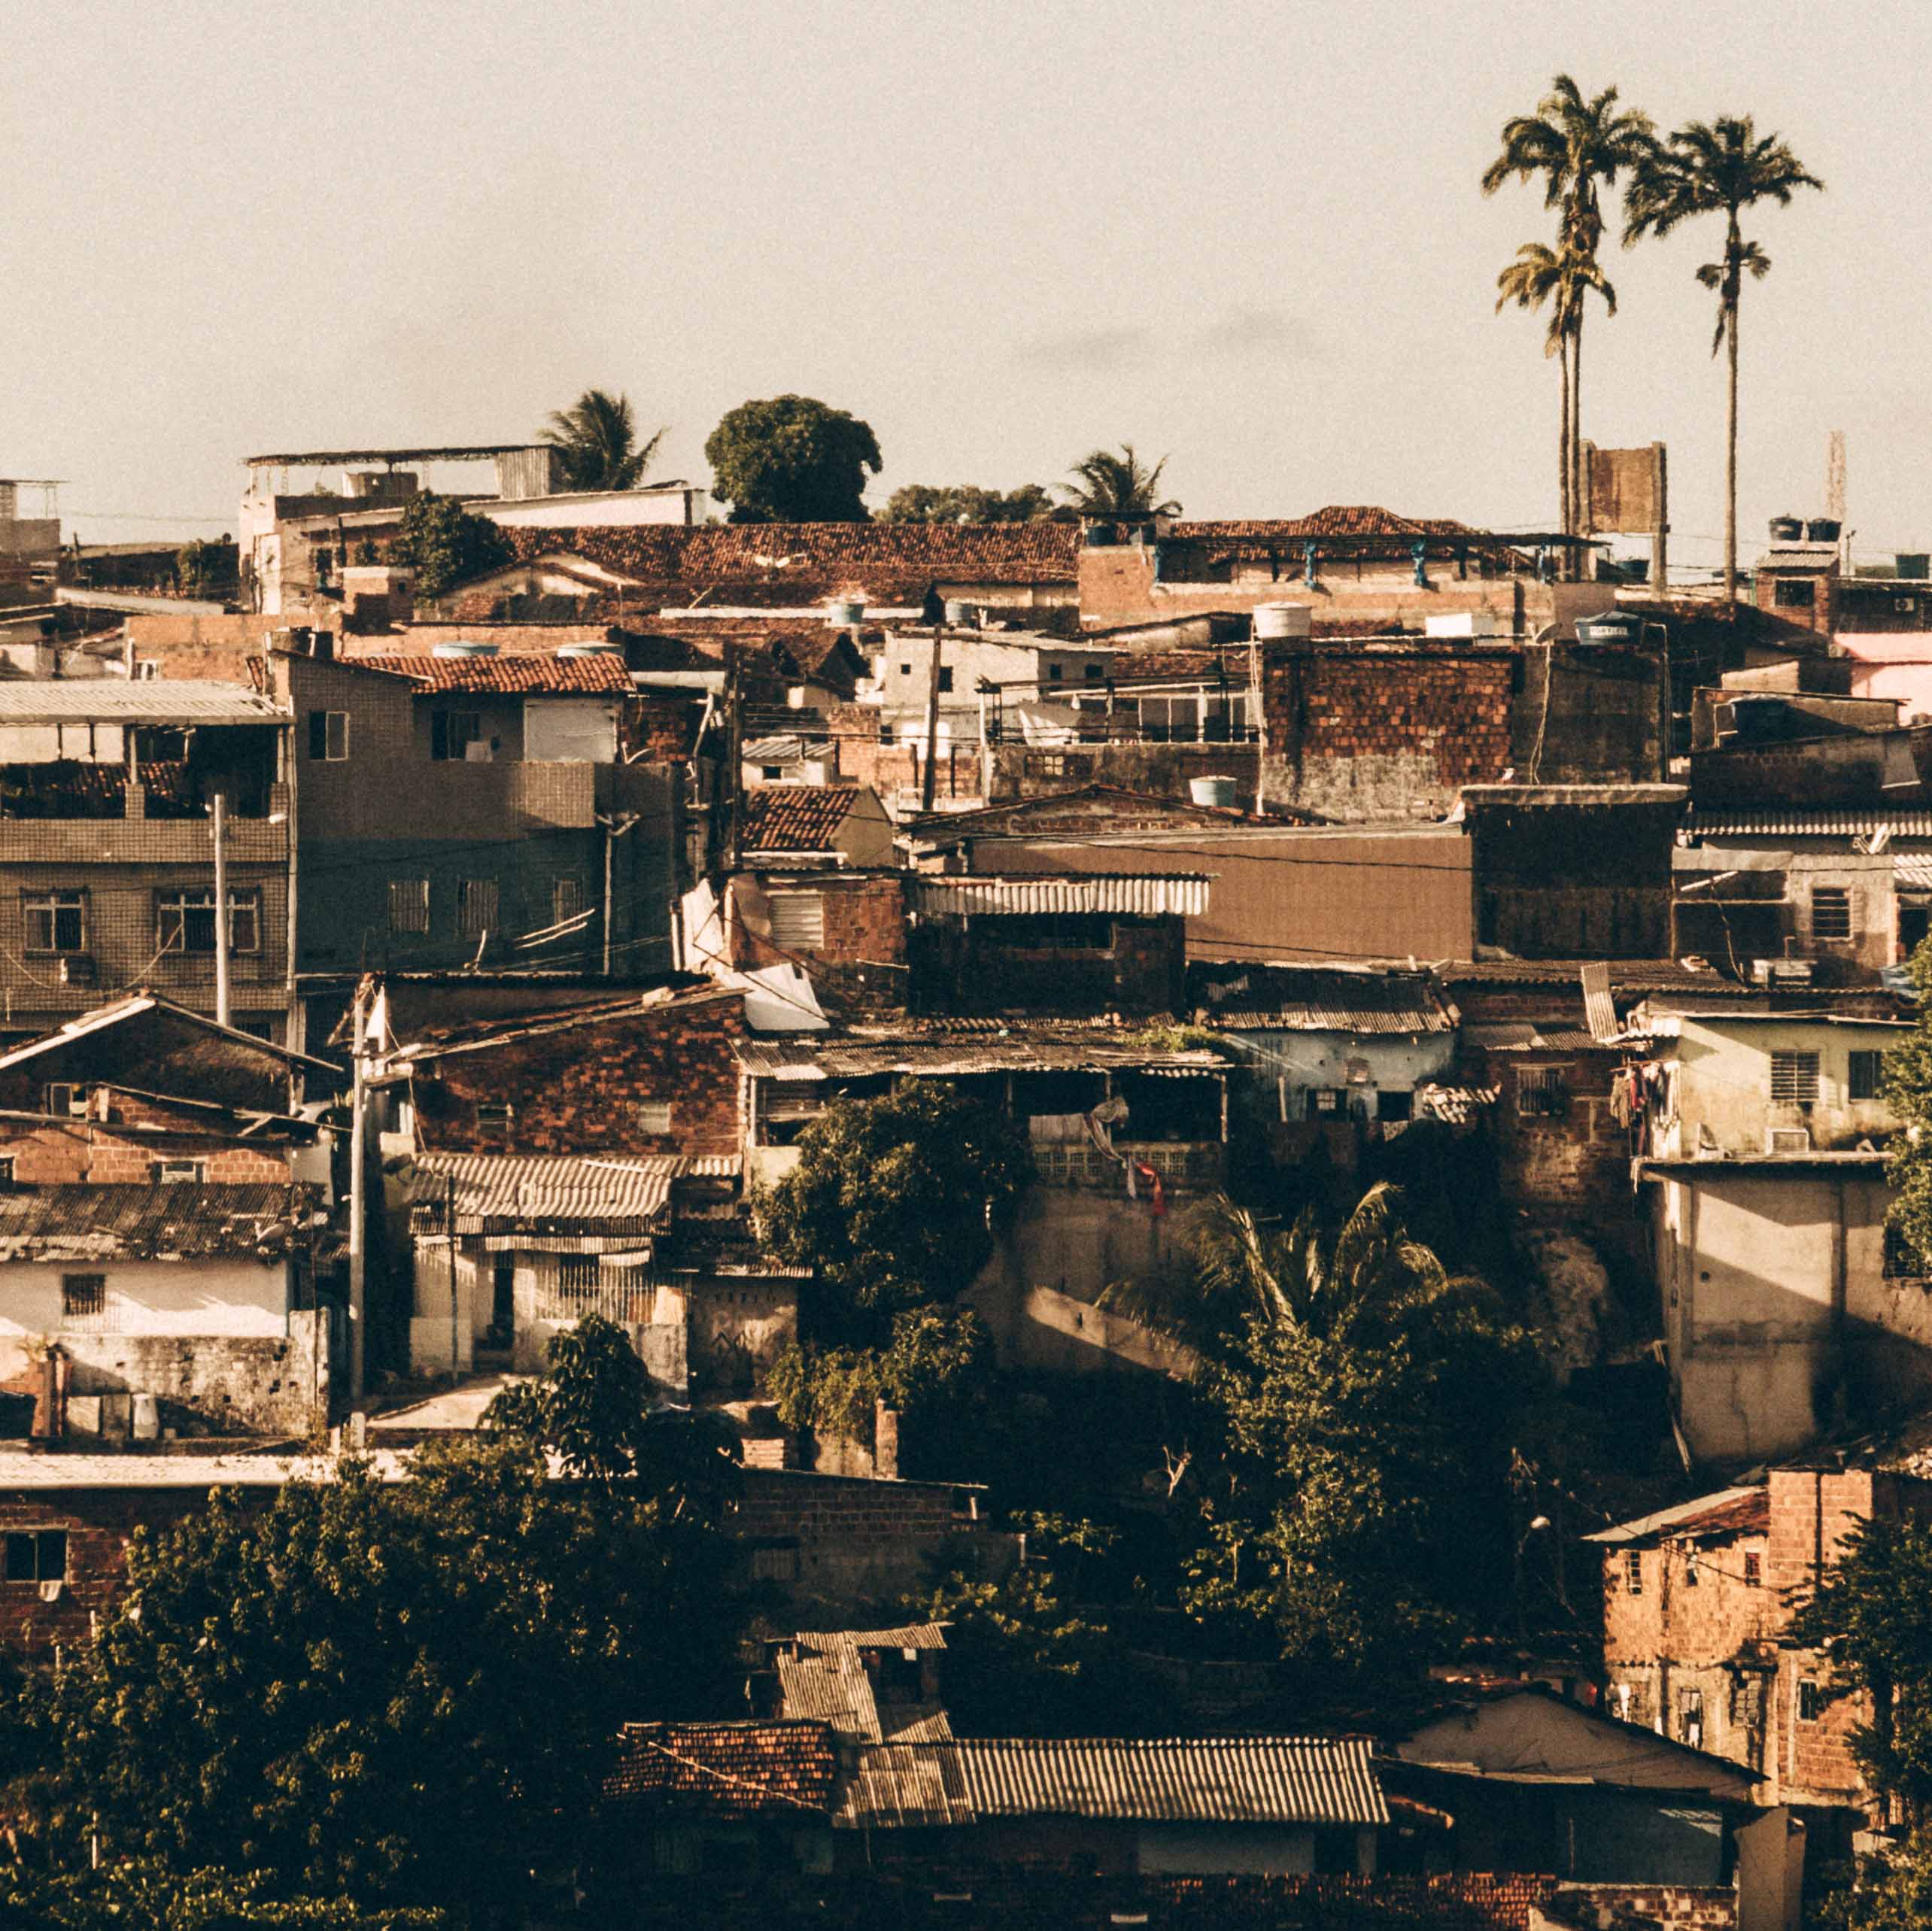 View across the rooftops of a favela in Brazil